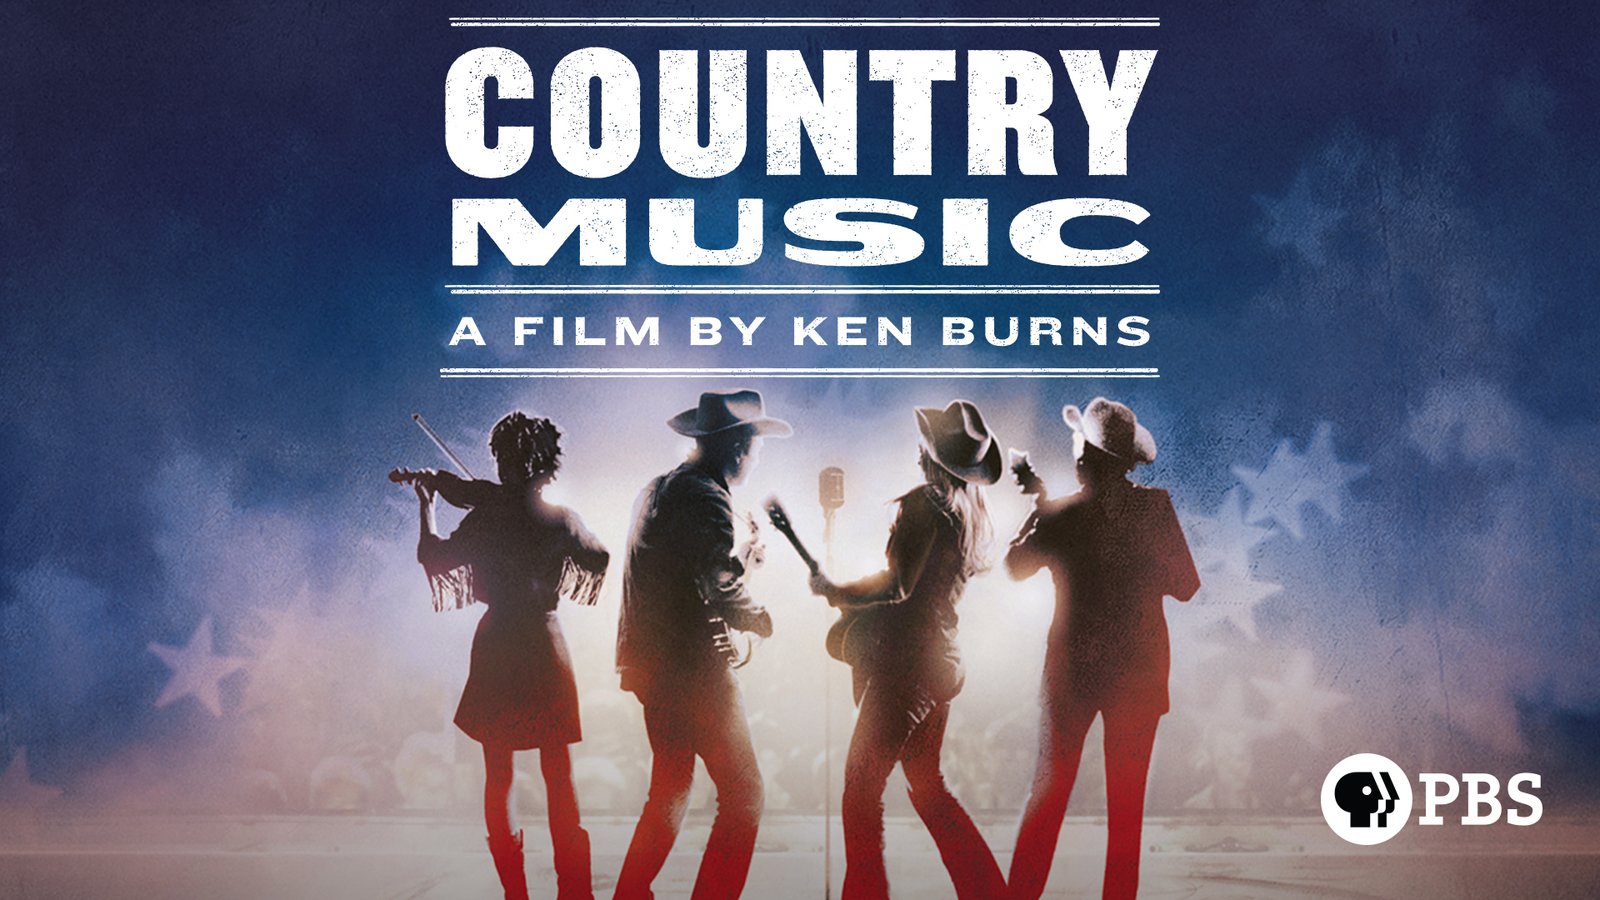 Ken Burns: Country Music - The History of an American Art Form